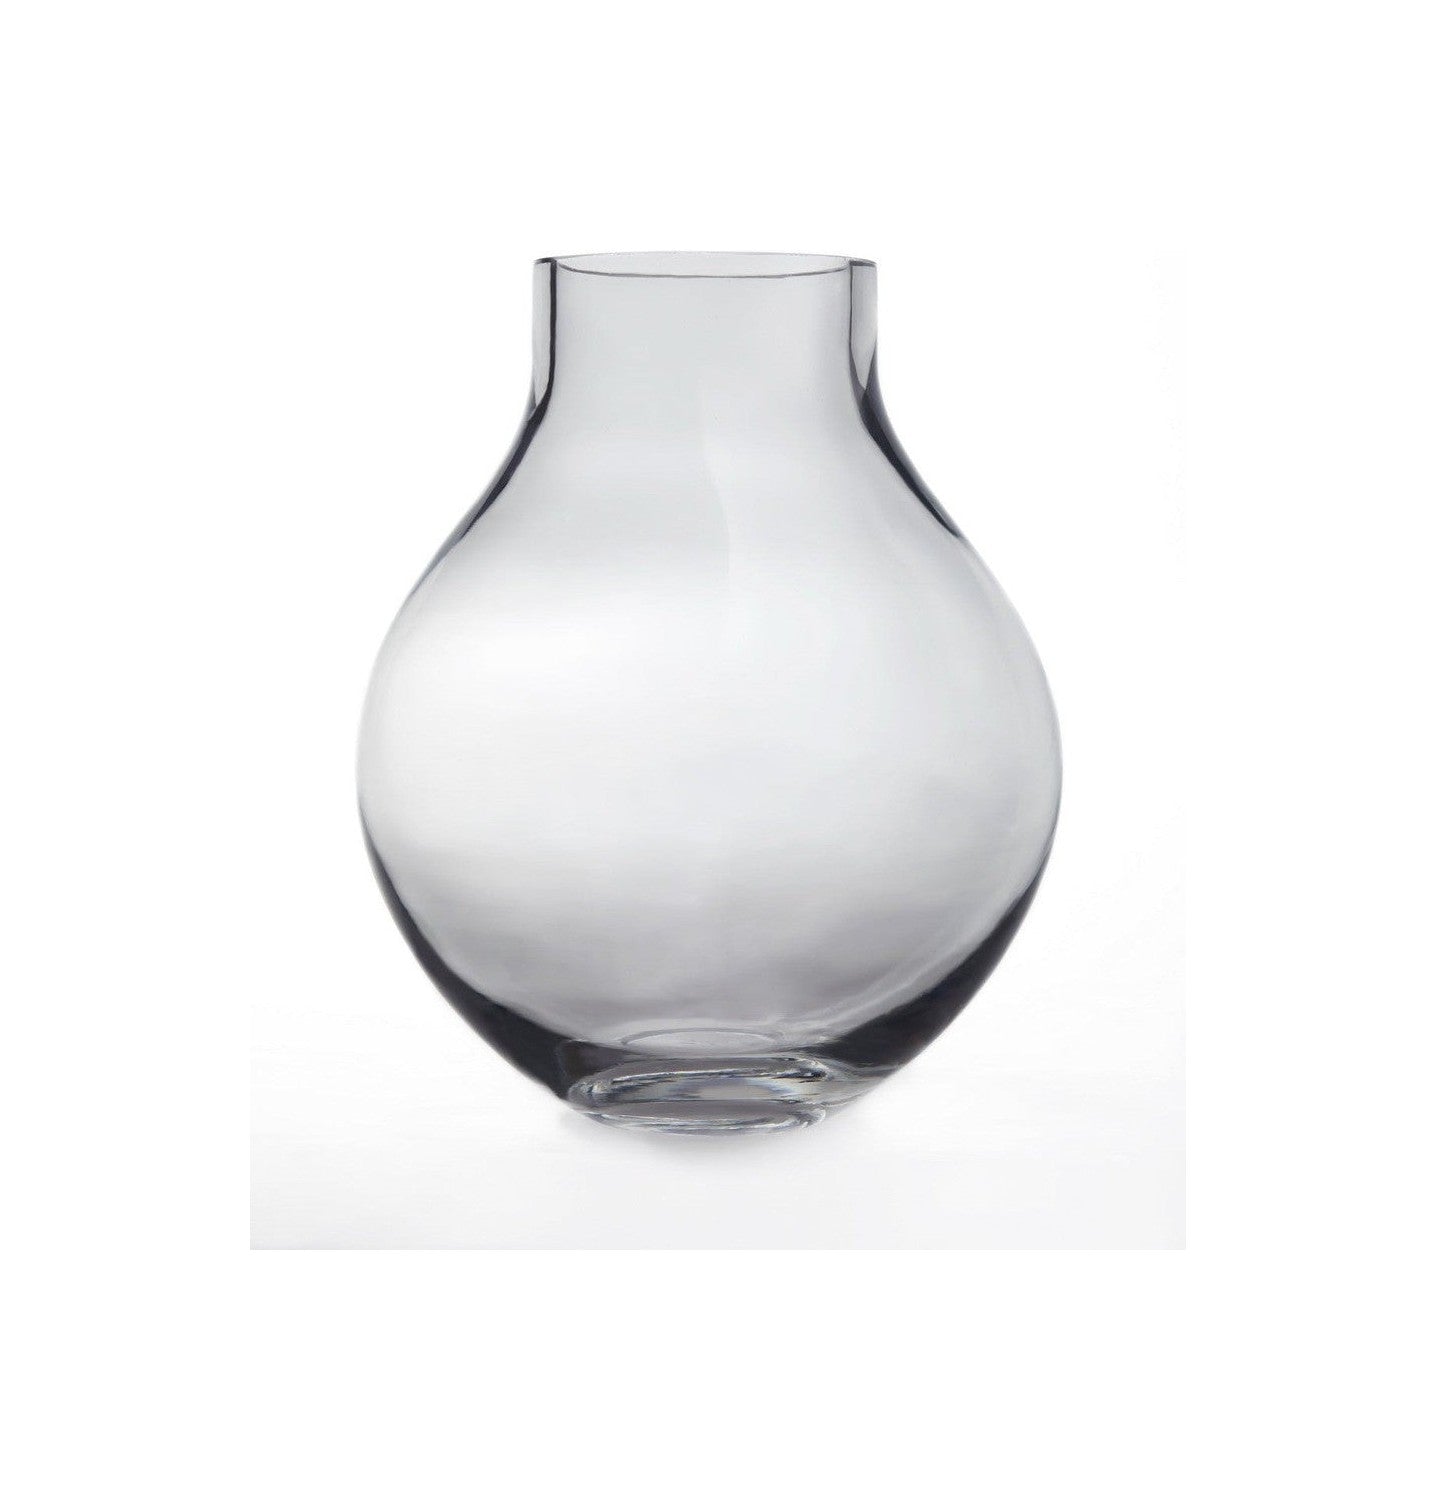 XL glass vase in bulb shape, 36cm tall, ENVIE 36TR, 9mm thick glass